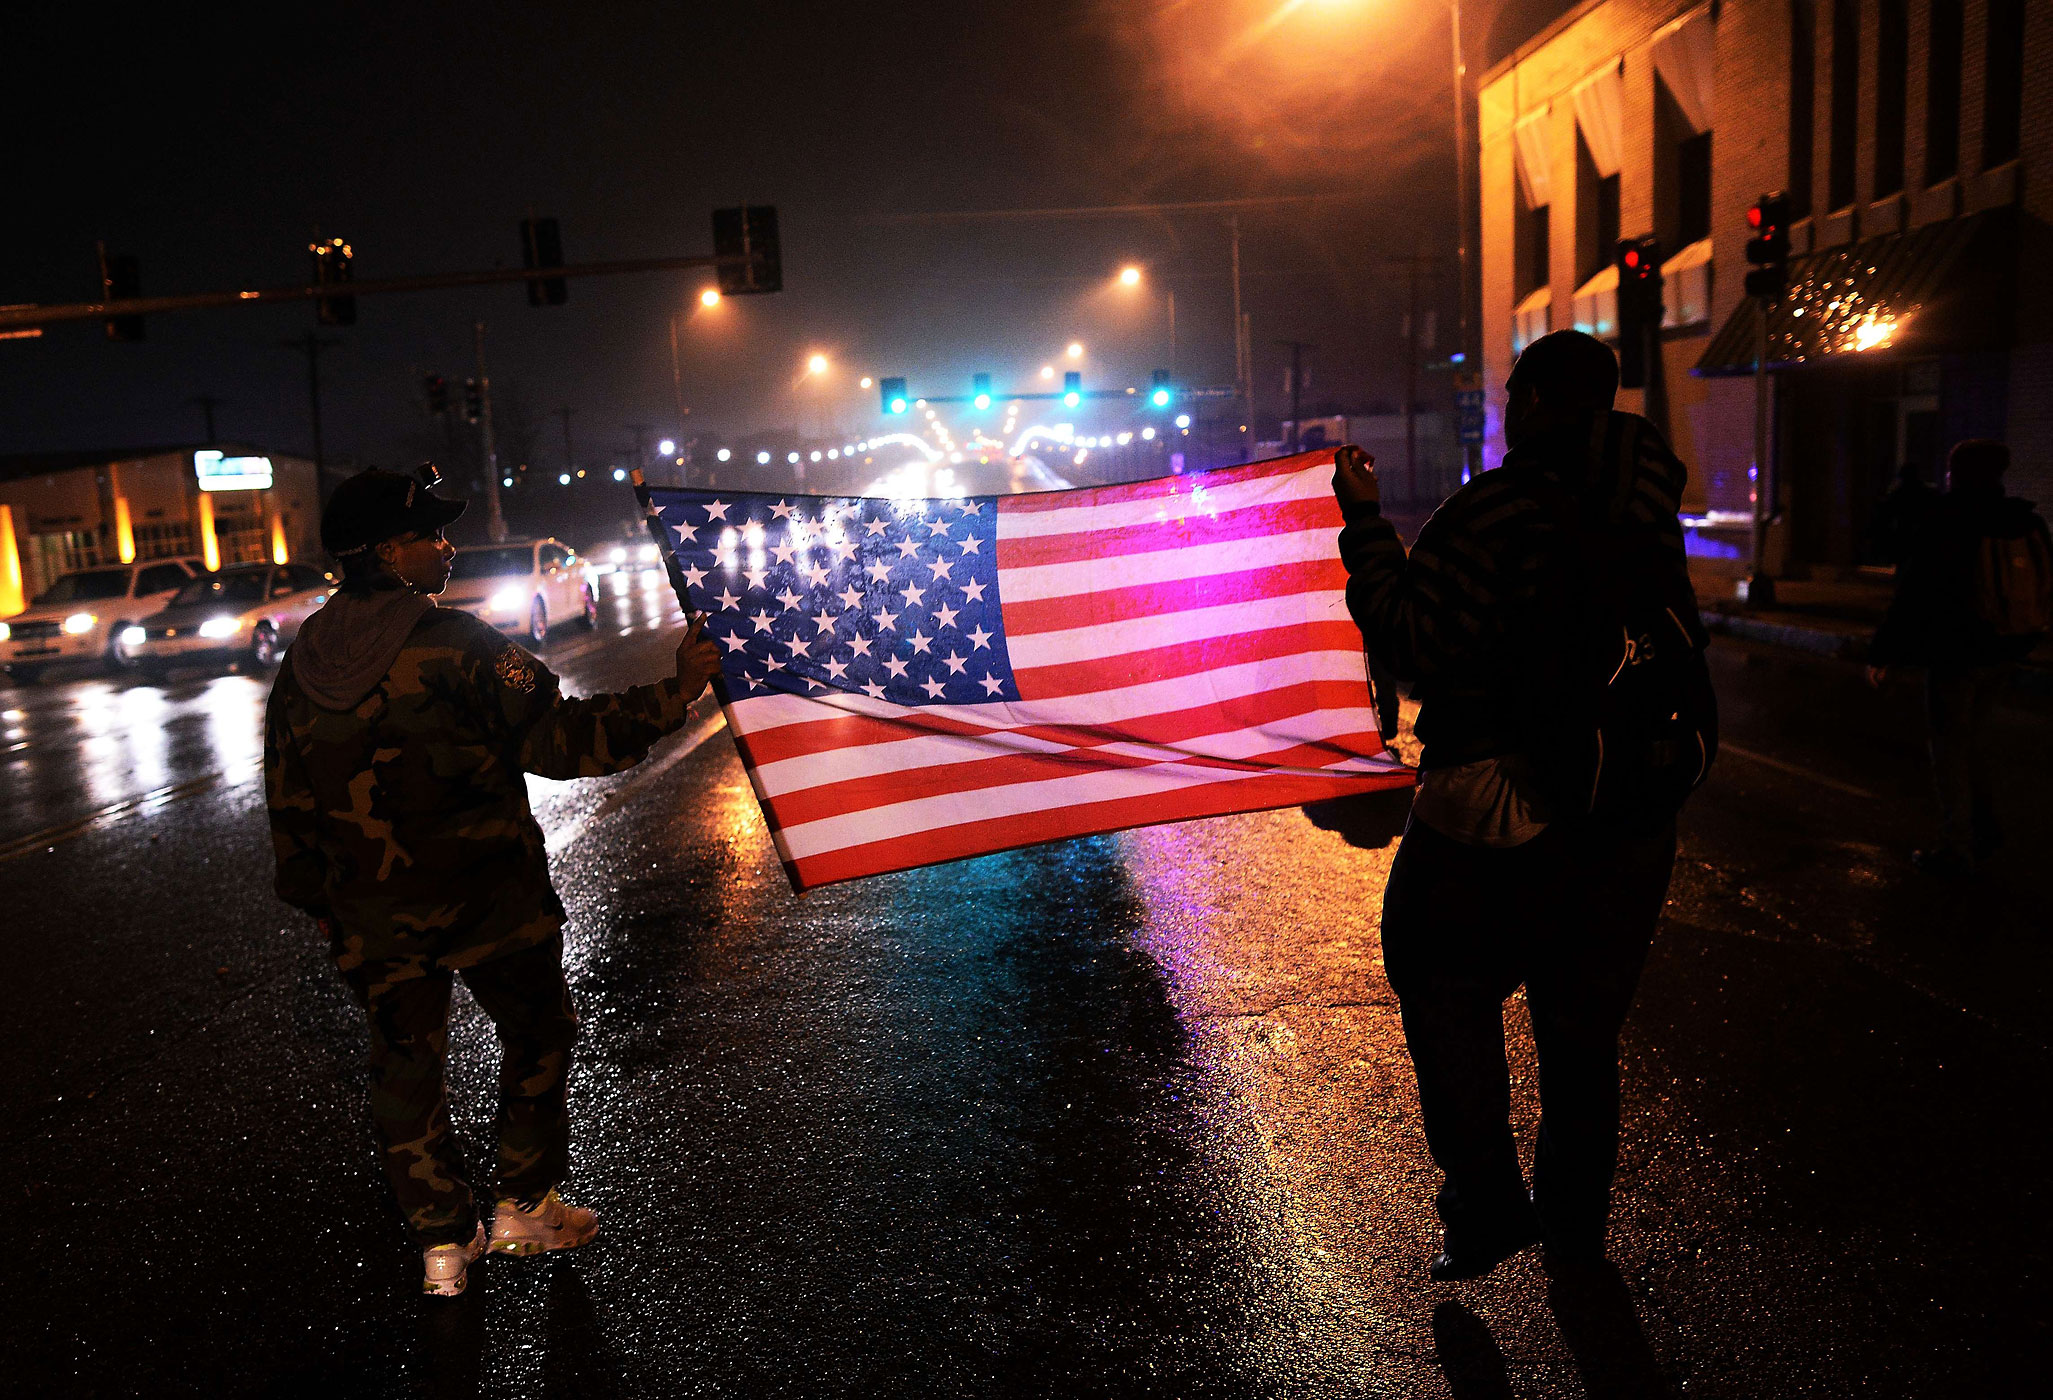 Two demonstrators march with a U.S. flag in St. Louis on Nov. 23, 2014, to protest the death of 18-year-old Michael Brown (Jewel Samad—AFP/Getty Images)